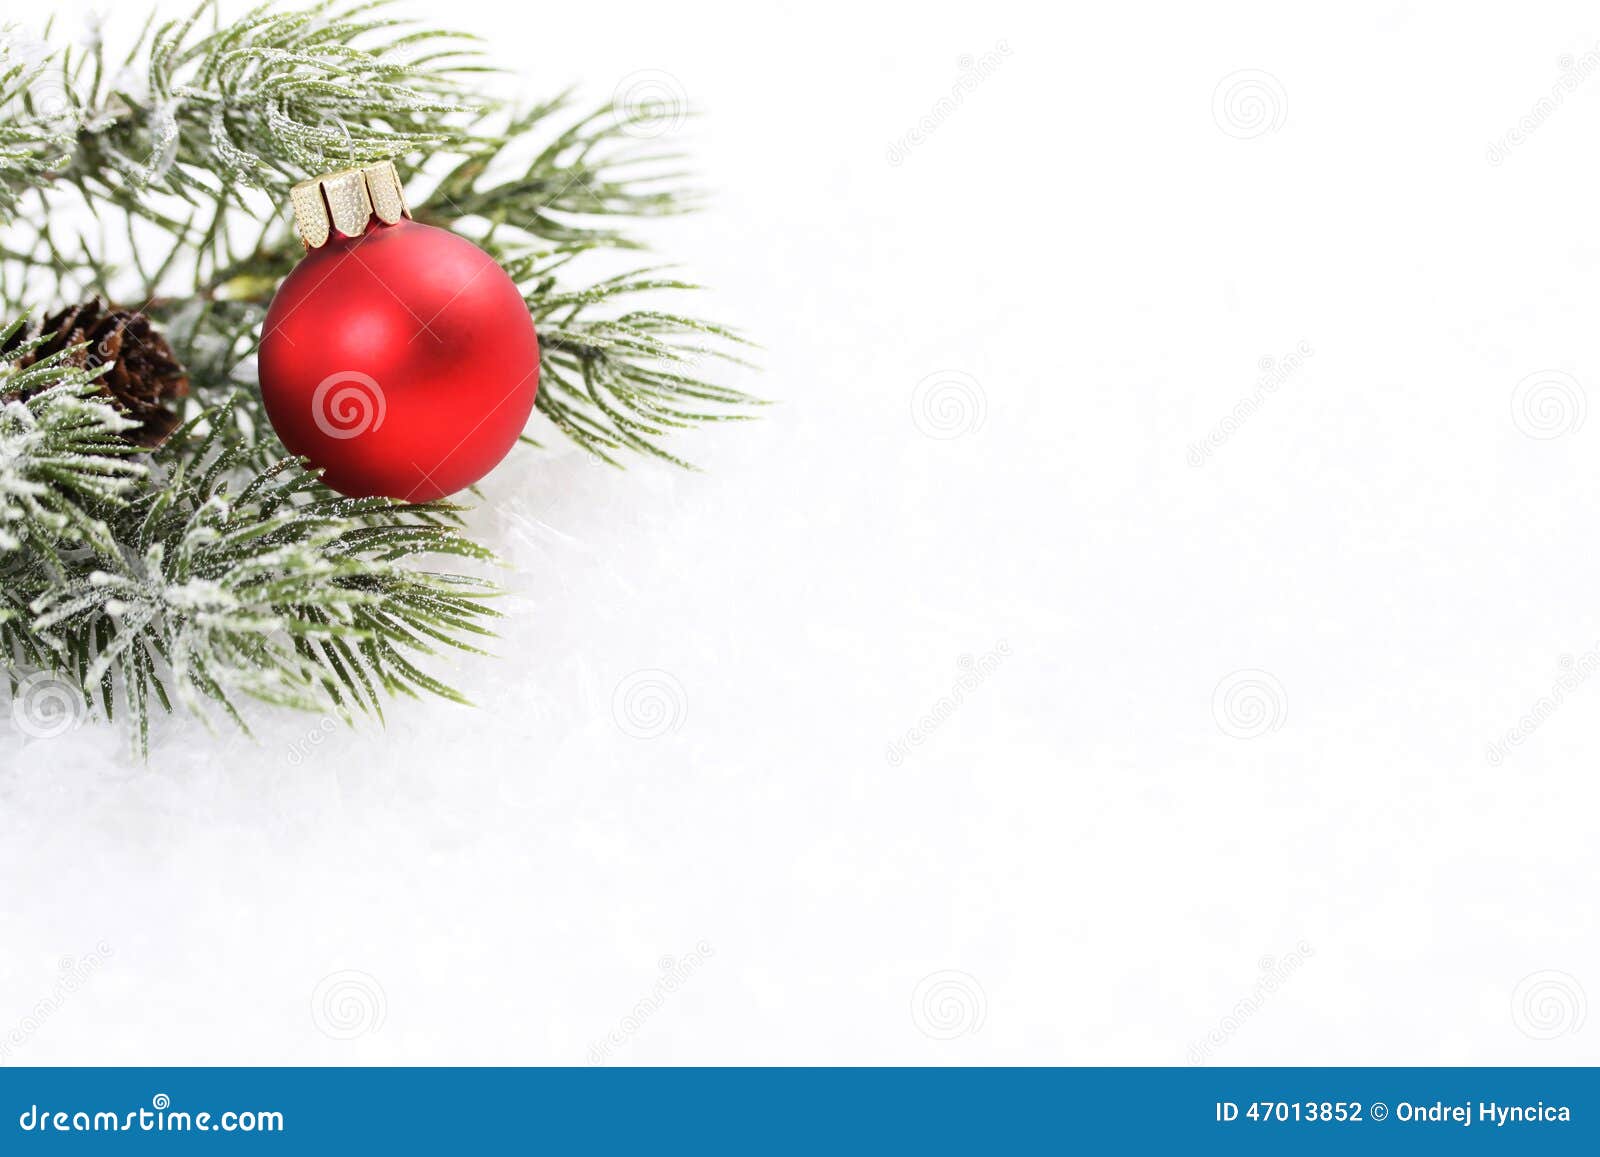 icing pine branch with cone and red matt christmas ball on snow